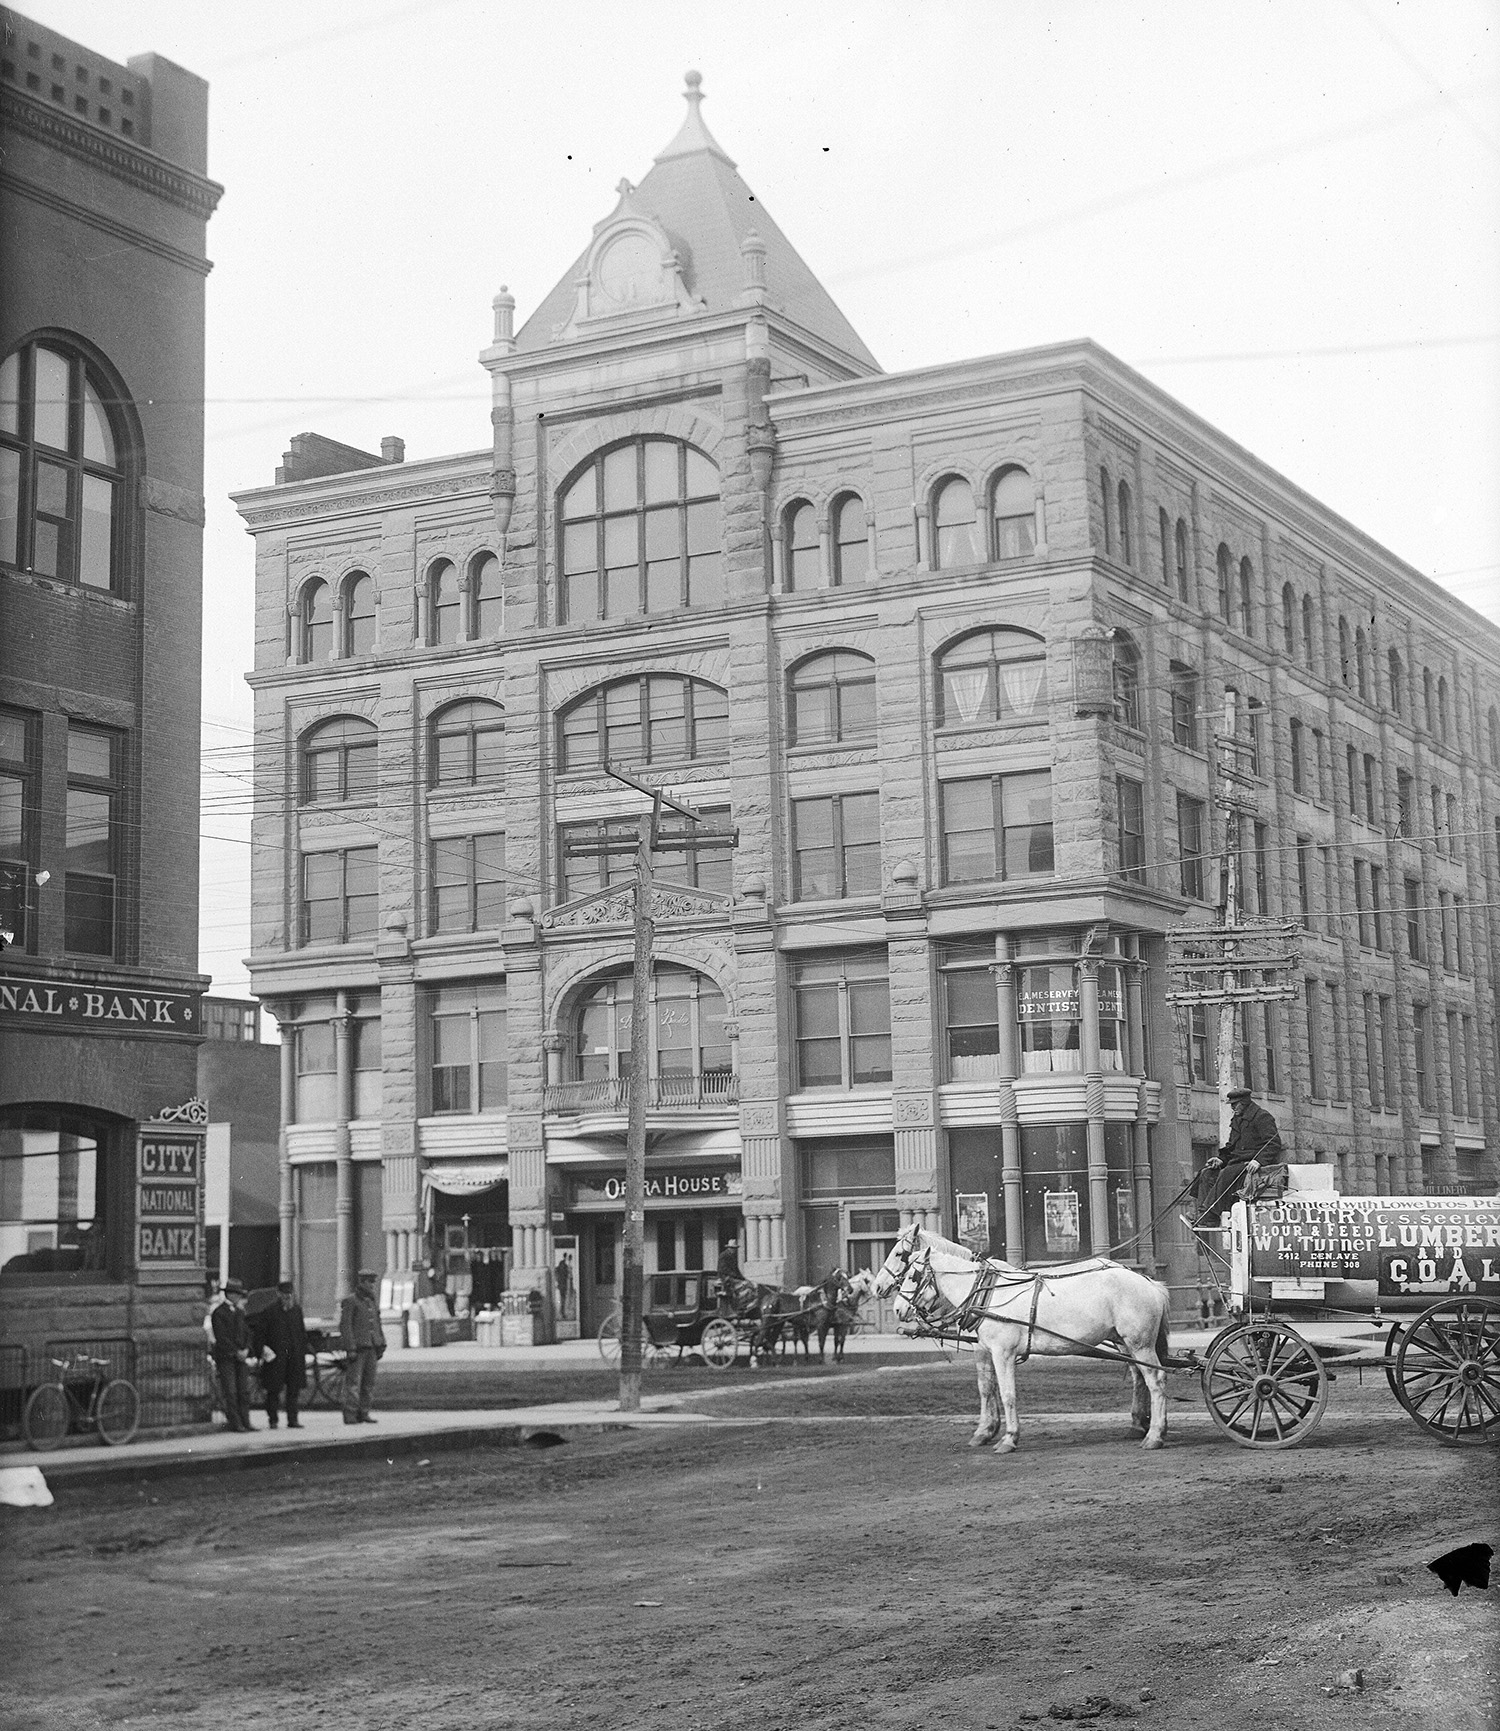 The Kearney Opera House, pictured in 1910. (Library of Congress)